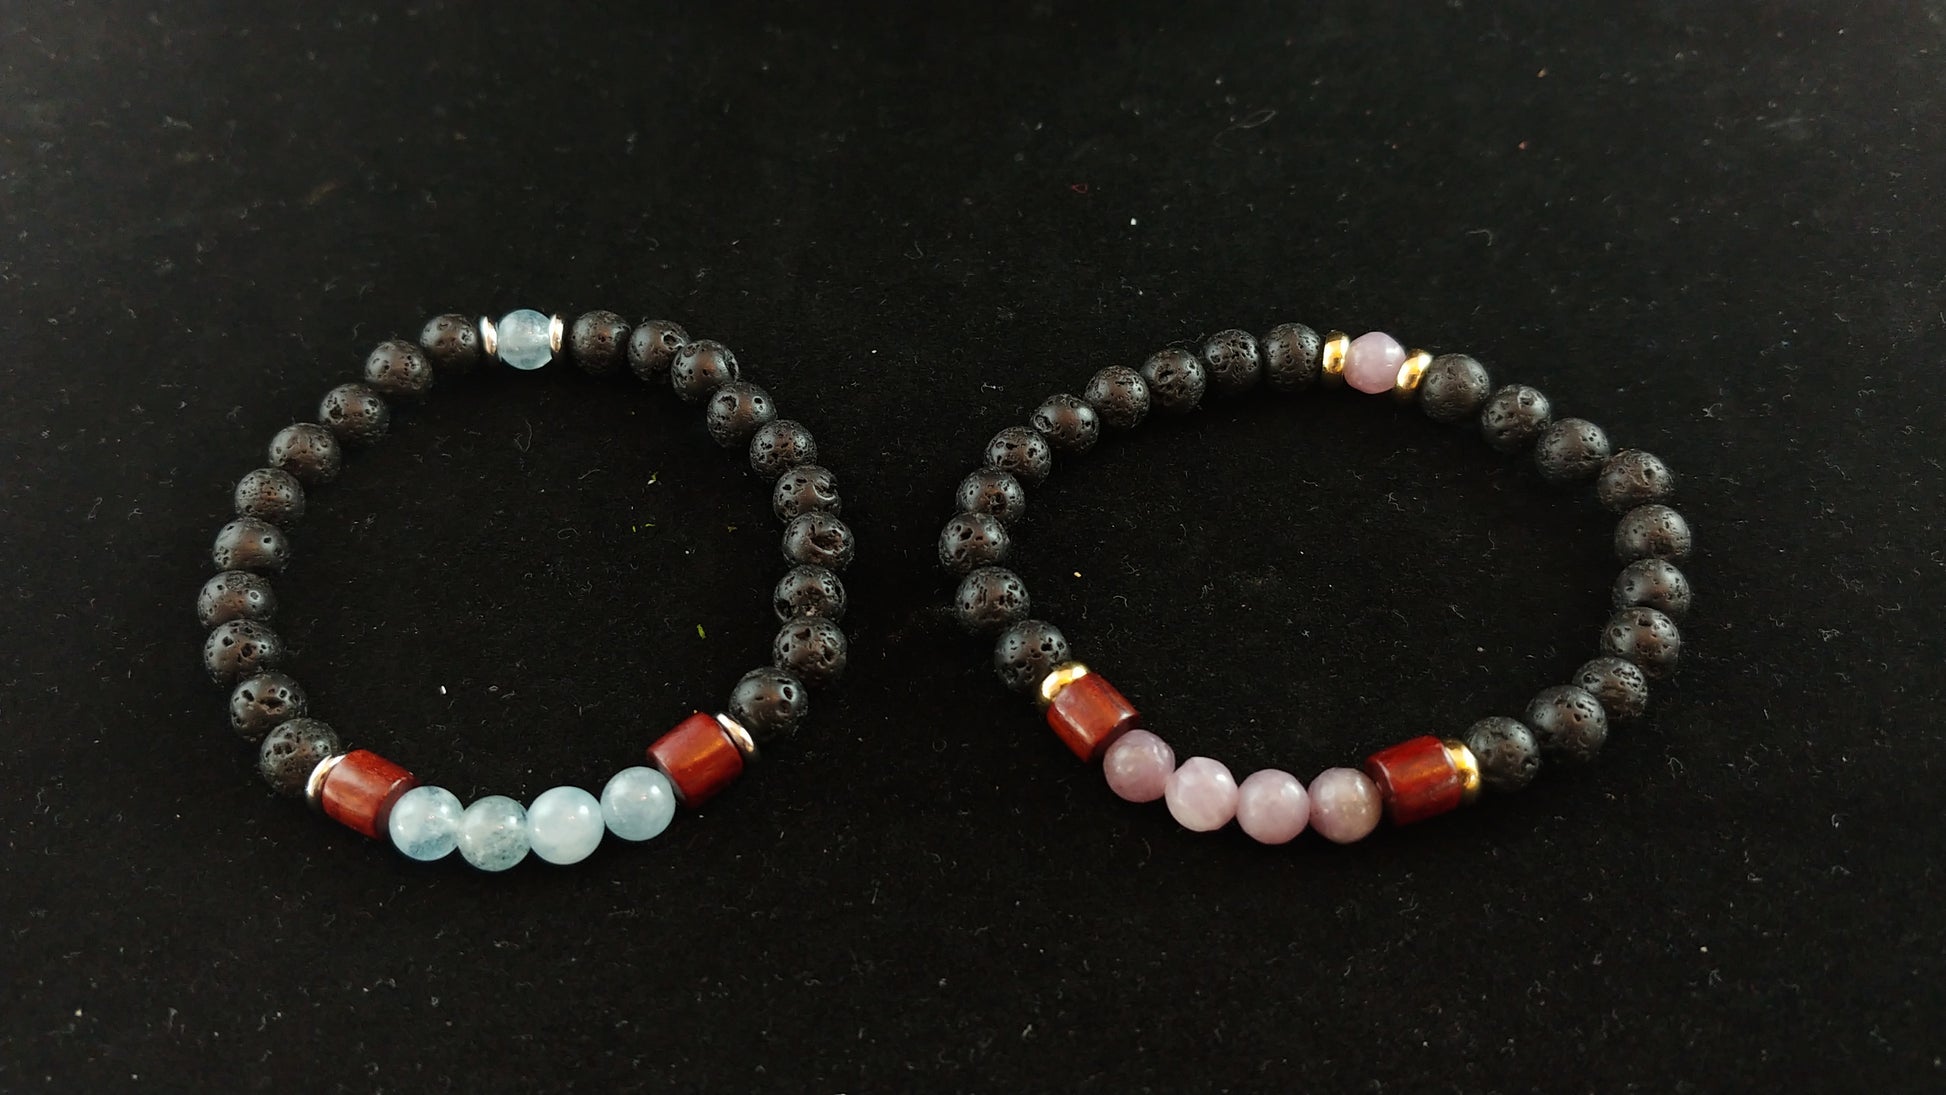 Two bracelets on a dark black background. One bracelet has bright blue aquamarine stones mixed with lava stones and wood and thin gold spacers. The other bracelet sits to the right and has the same golden and wooden spacers with lava and bright pink Aquamarine stones.